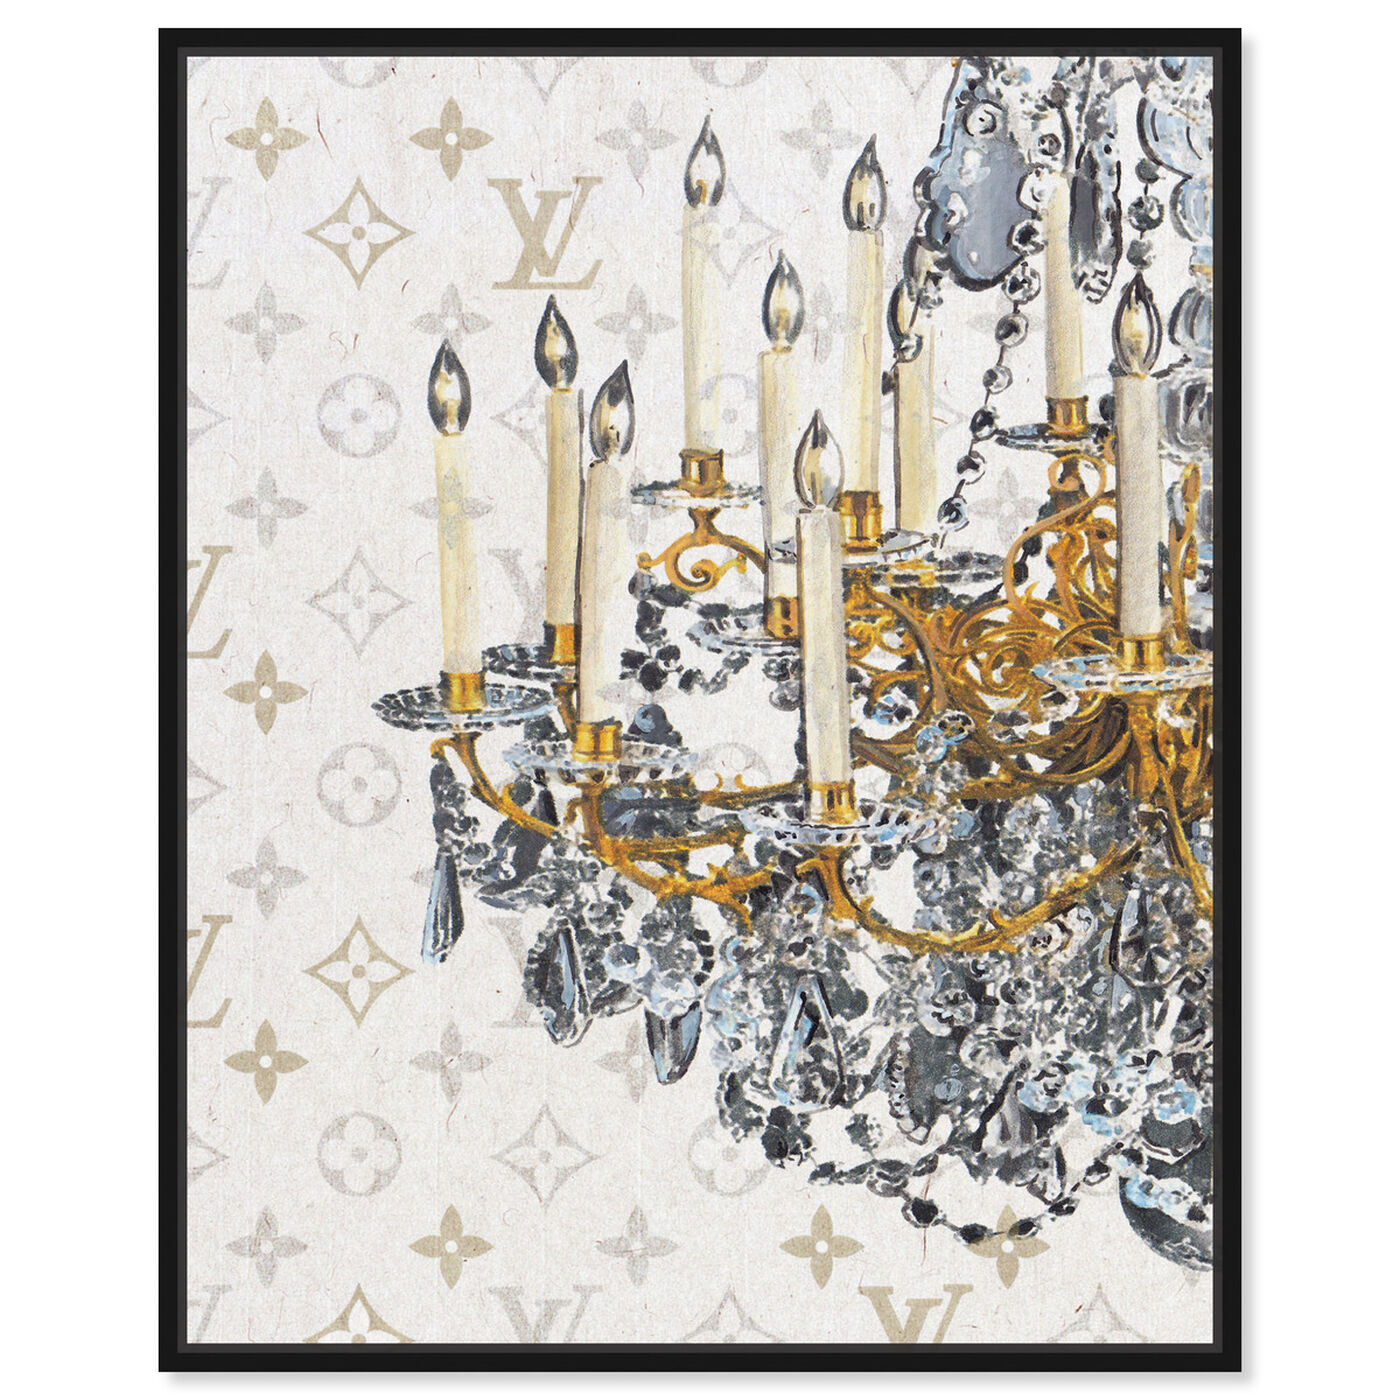 Front view of Fancy Light I featuring fashion and glam and chandeliers art.